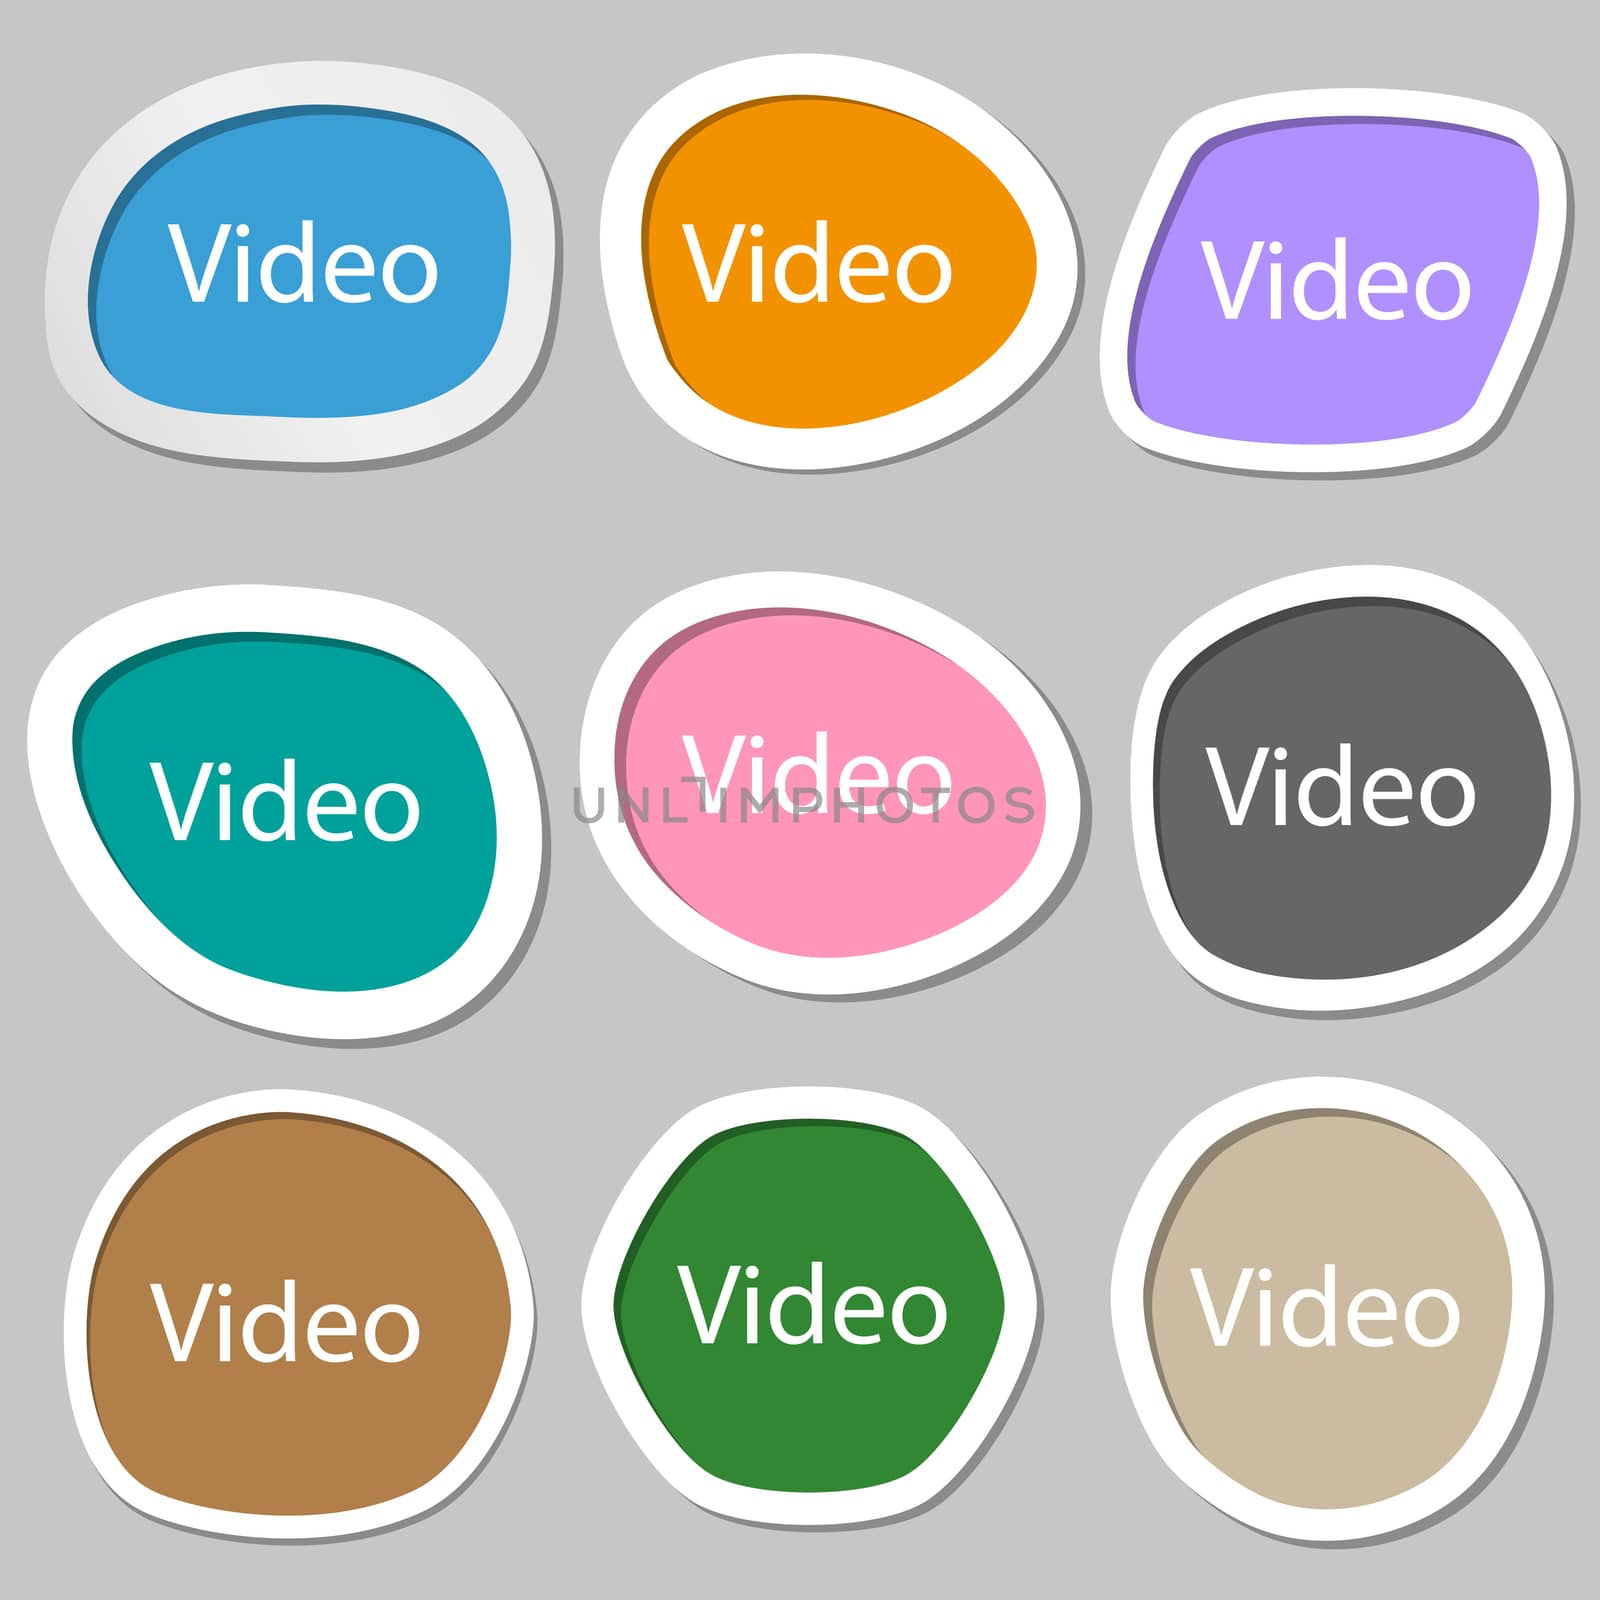 Play video sign icon. Player navigation symbol. Multicolored paper stickers. illustration